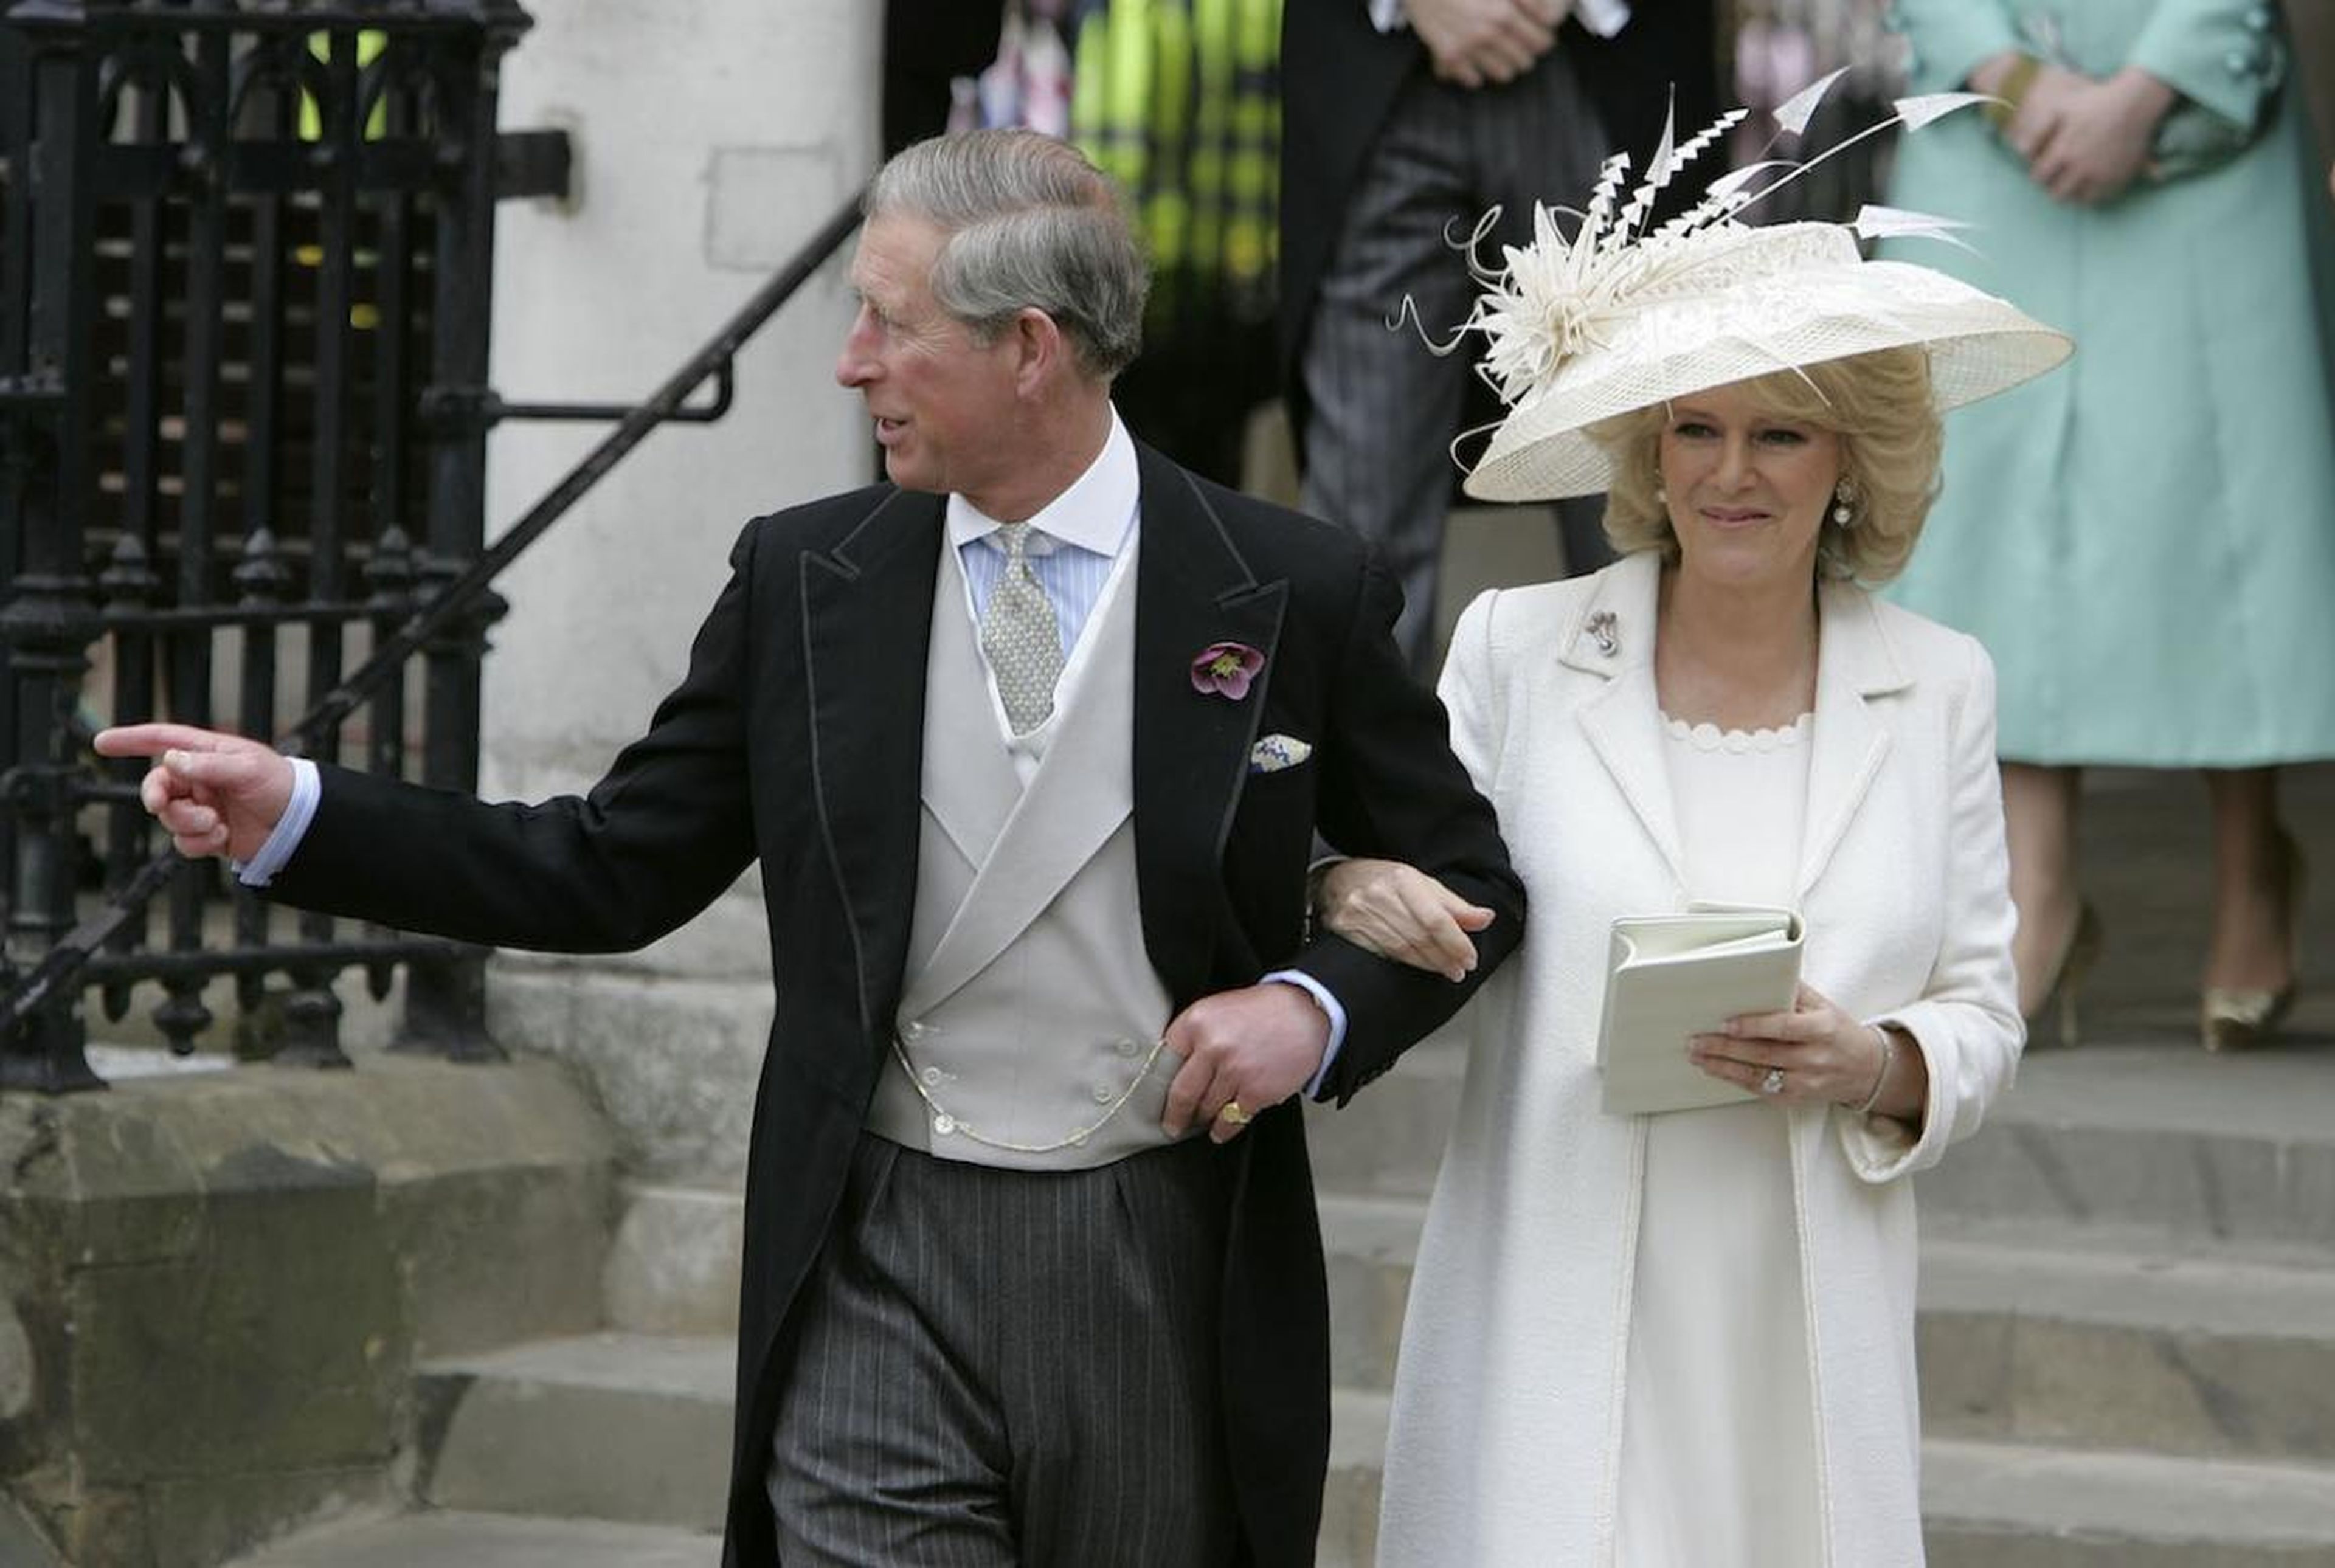 TRH Prince Charles, the Prince of Wales, and his wife Camilla, the Duchess of Cornwall, depart the Civil Ceremony where they were legally married, at The Guildhall, Windsor on April 9, 2005 in Berkshire, England.